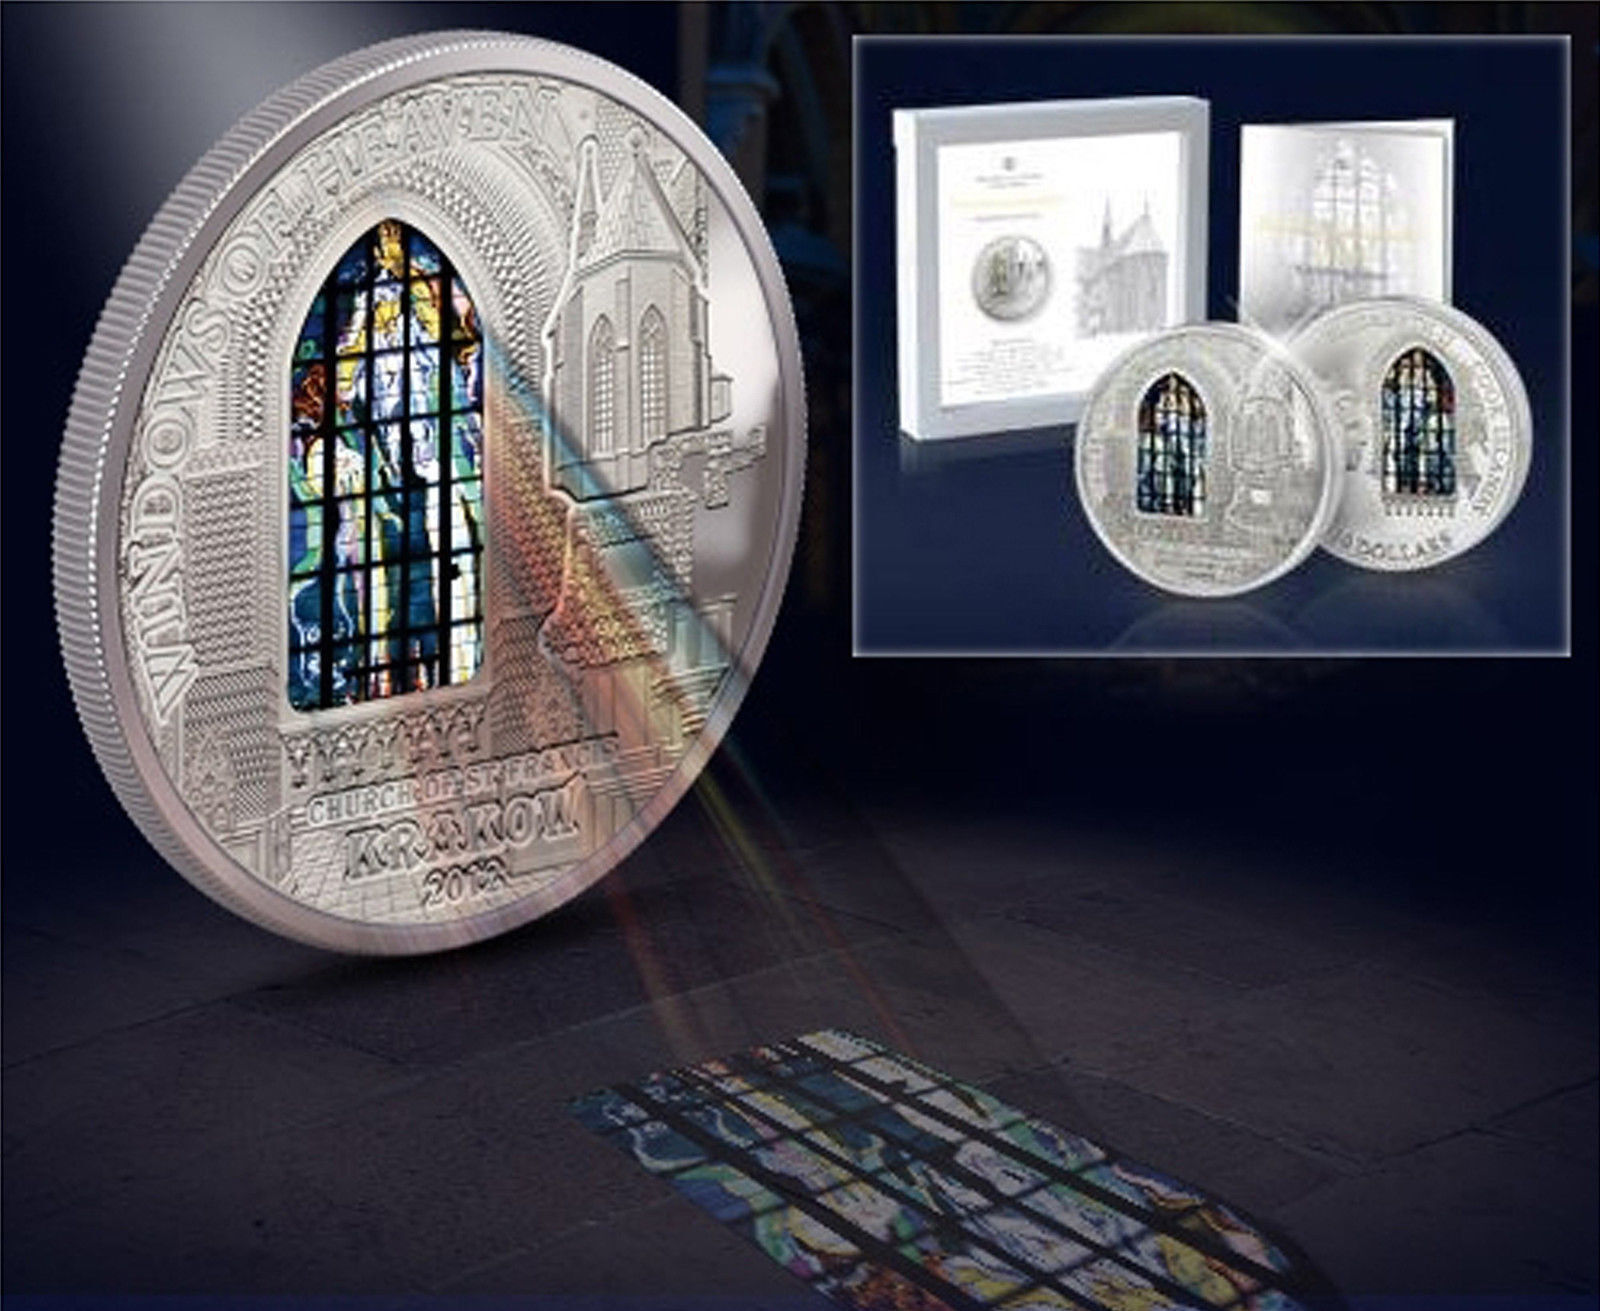 2012 Cook $10 Windows Of Heaven - Church Of St. Francis Krakow 50 G Silver Coin!